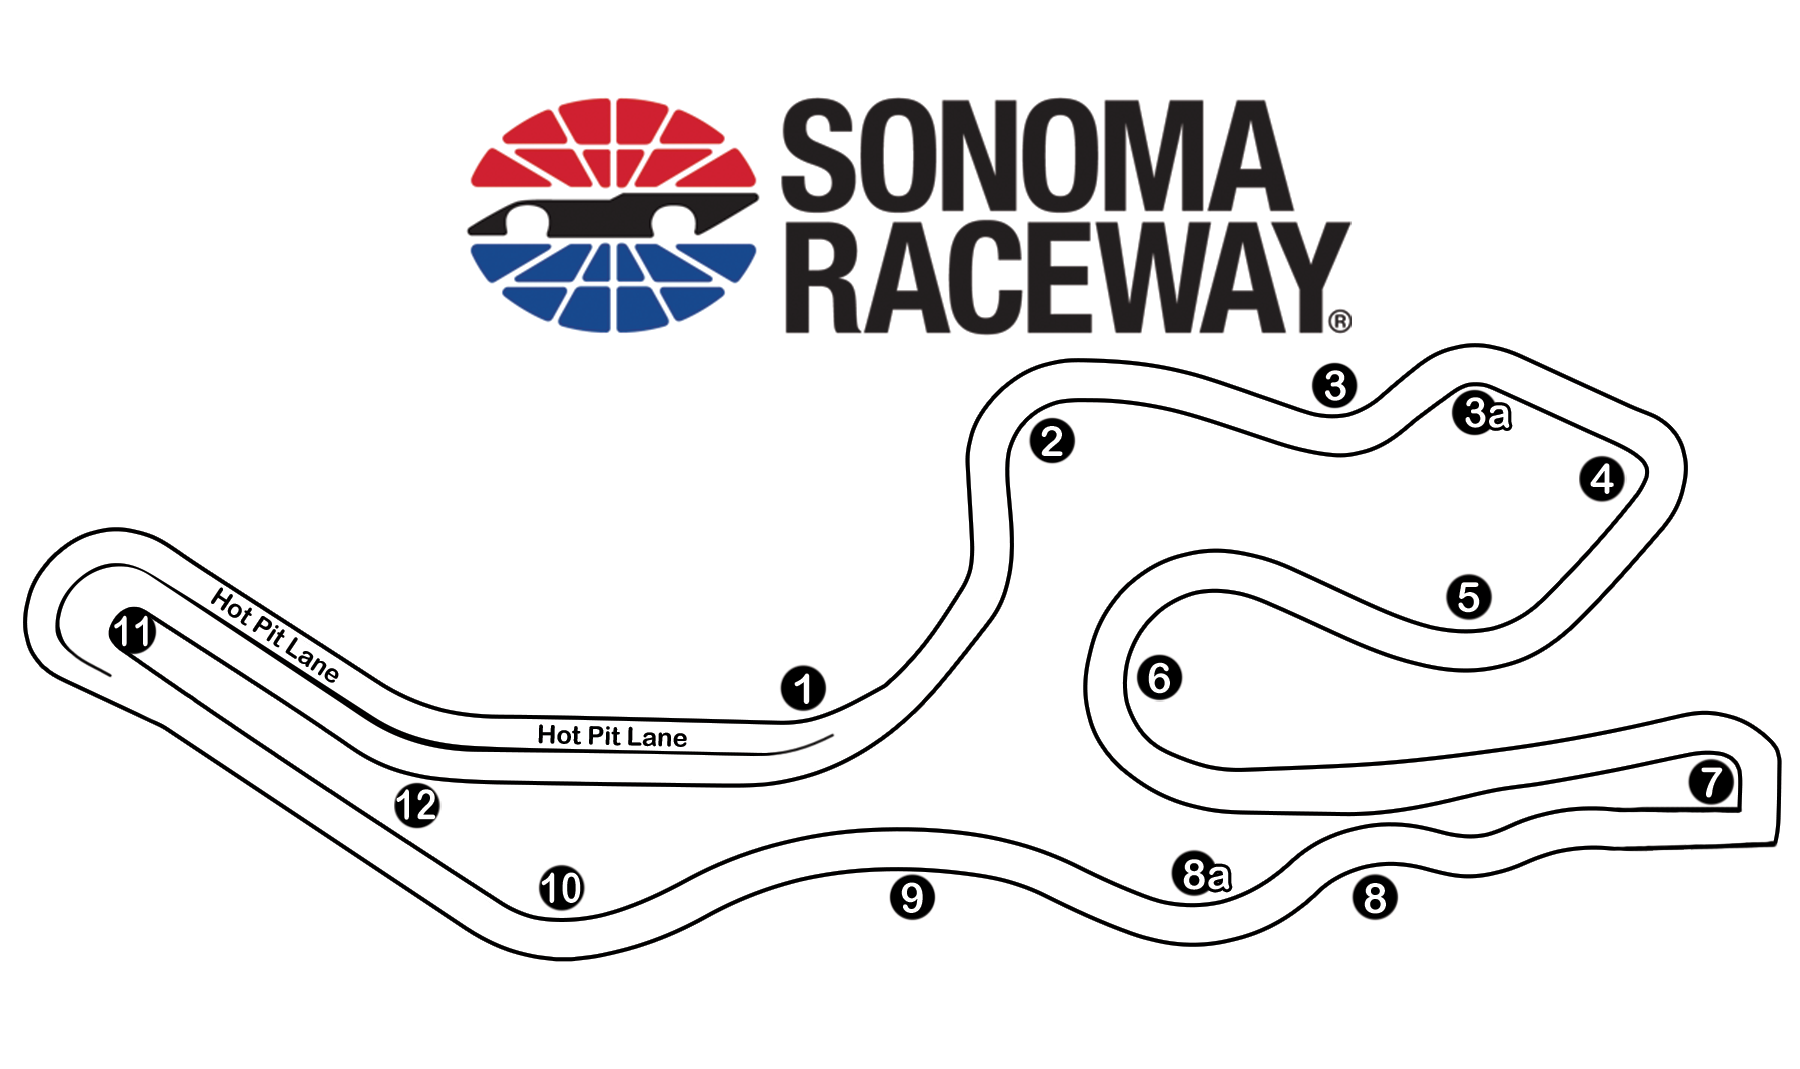 Sonoma+Track+Map.png